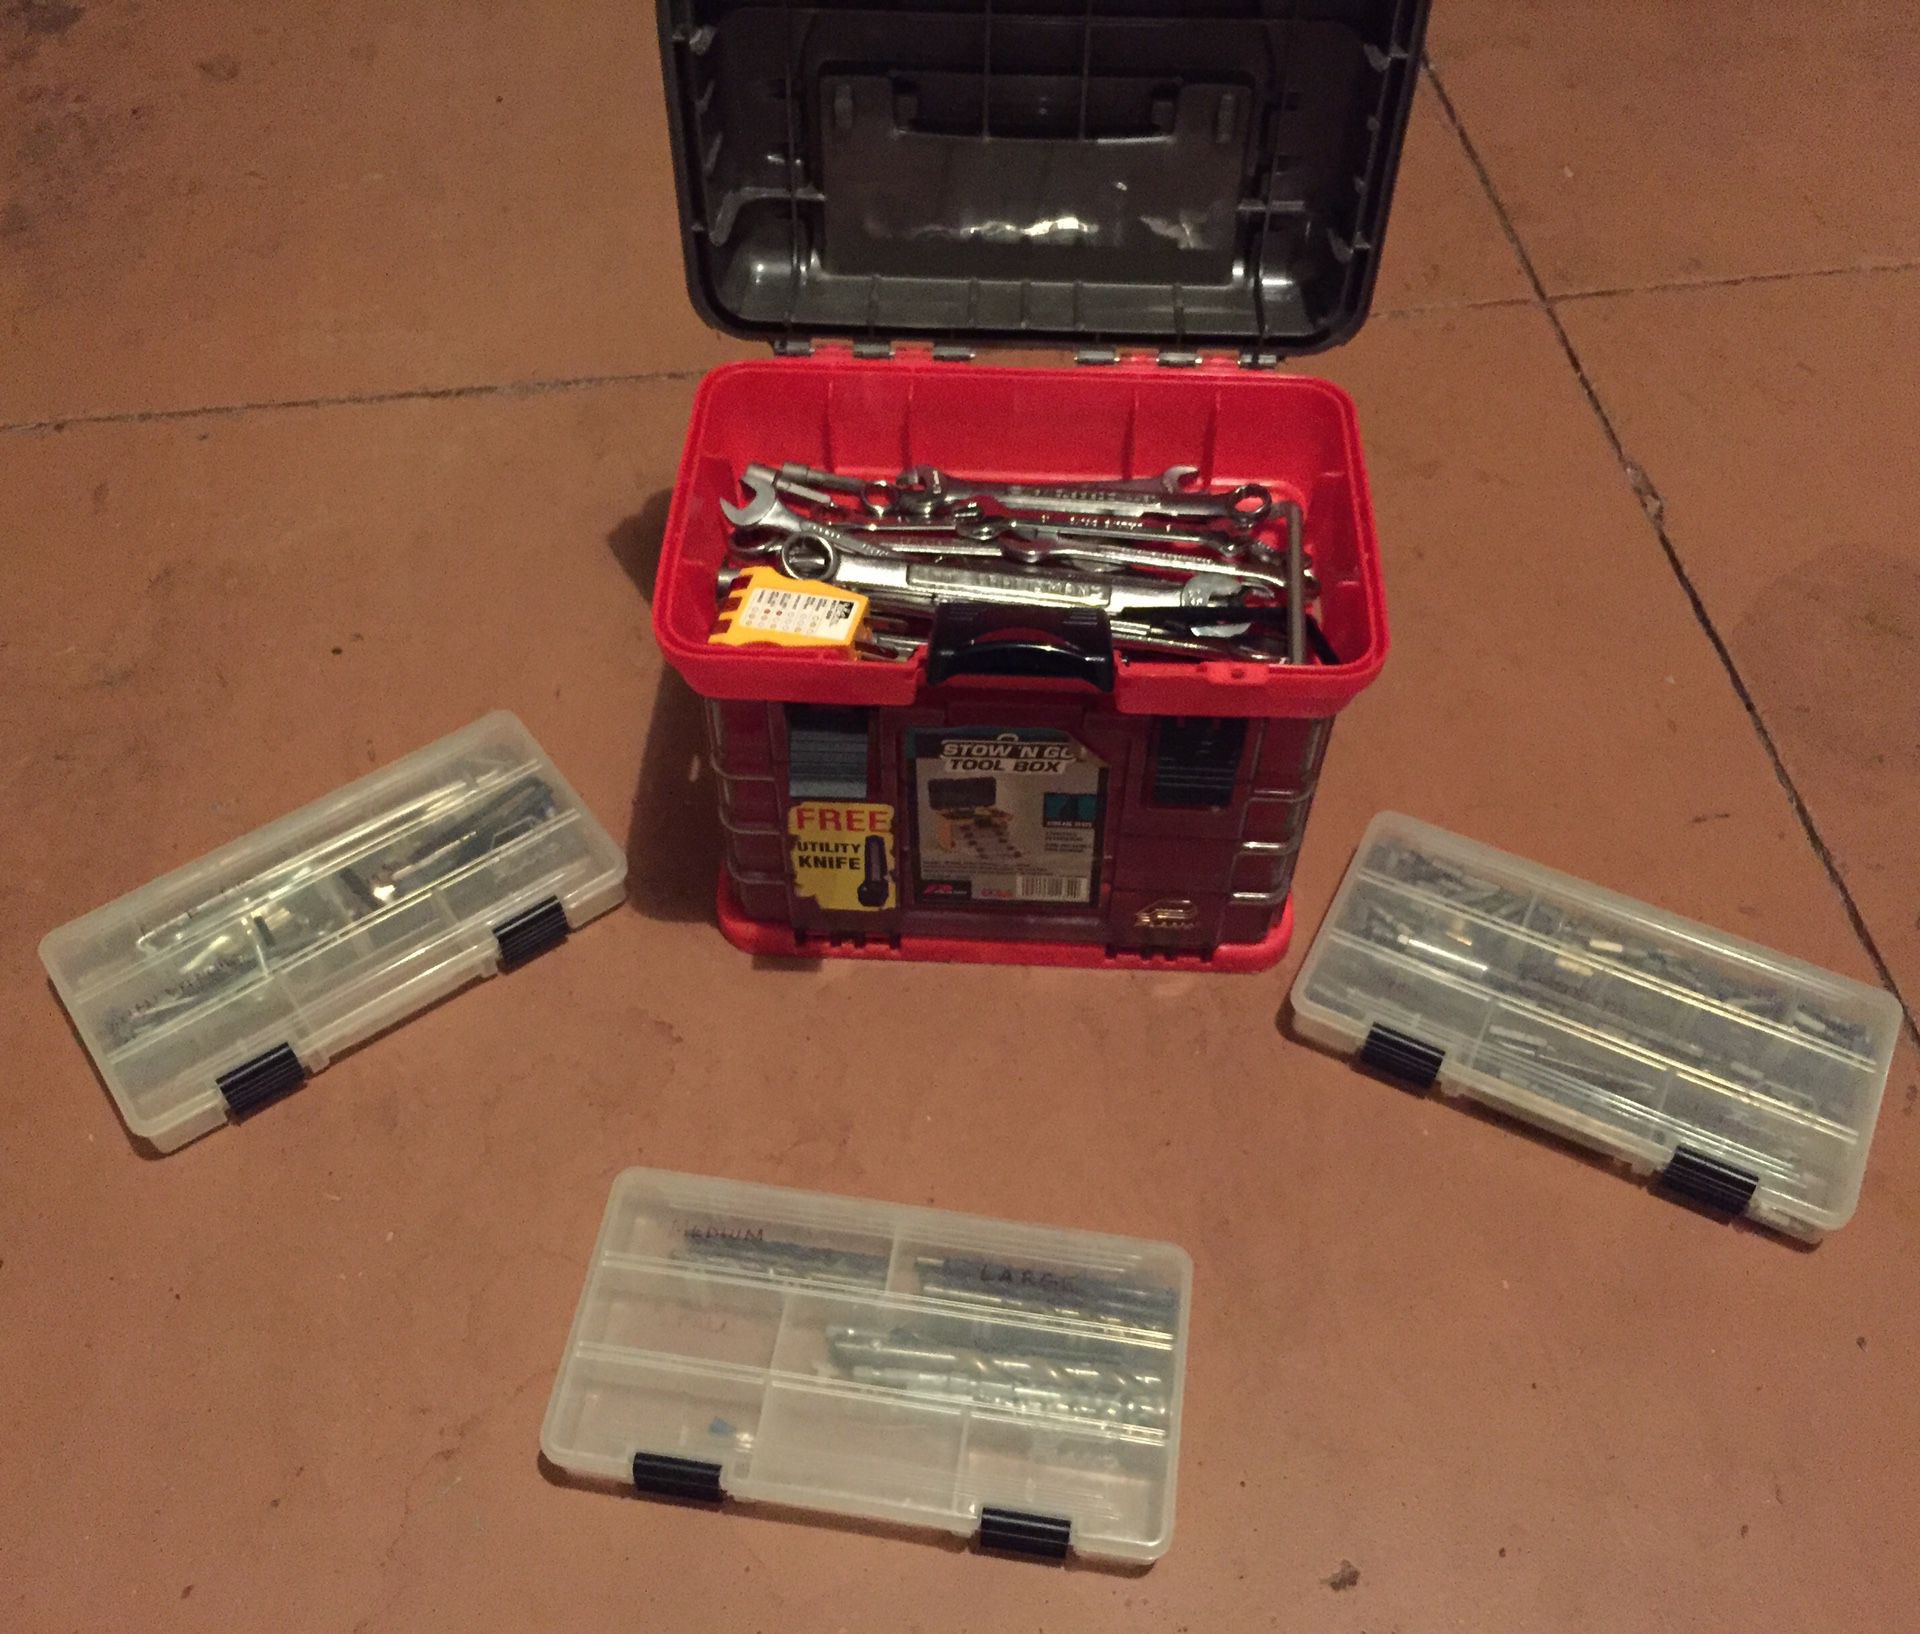 Stow n go toolbox w tools